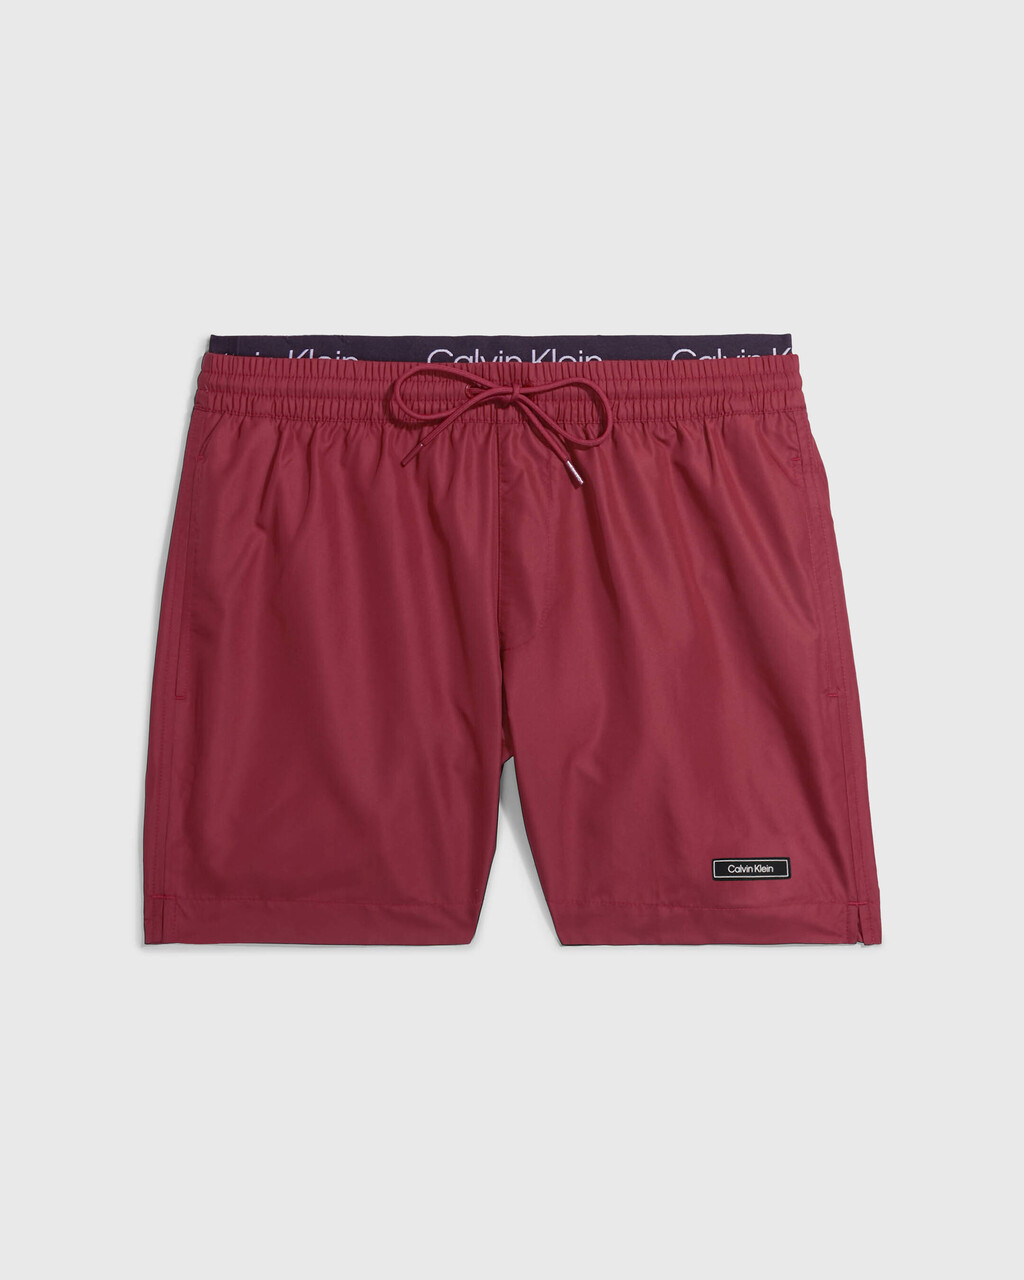 Core Solids Double Waistband Swim Shorts, Sienna Brown, hi-res